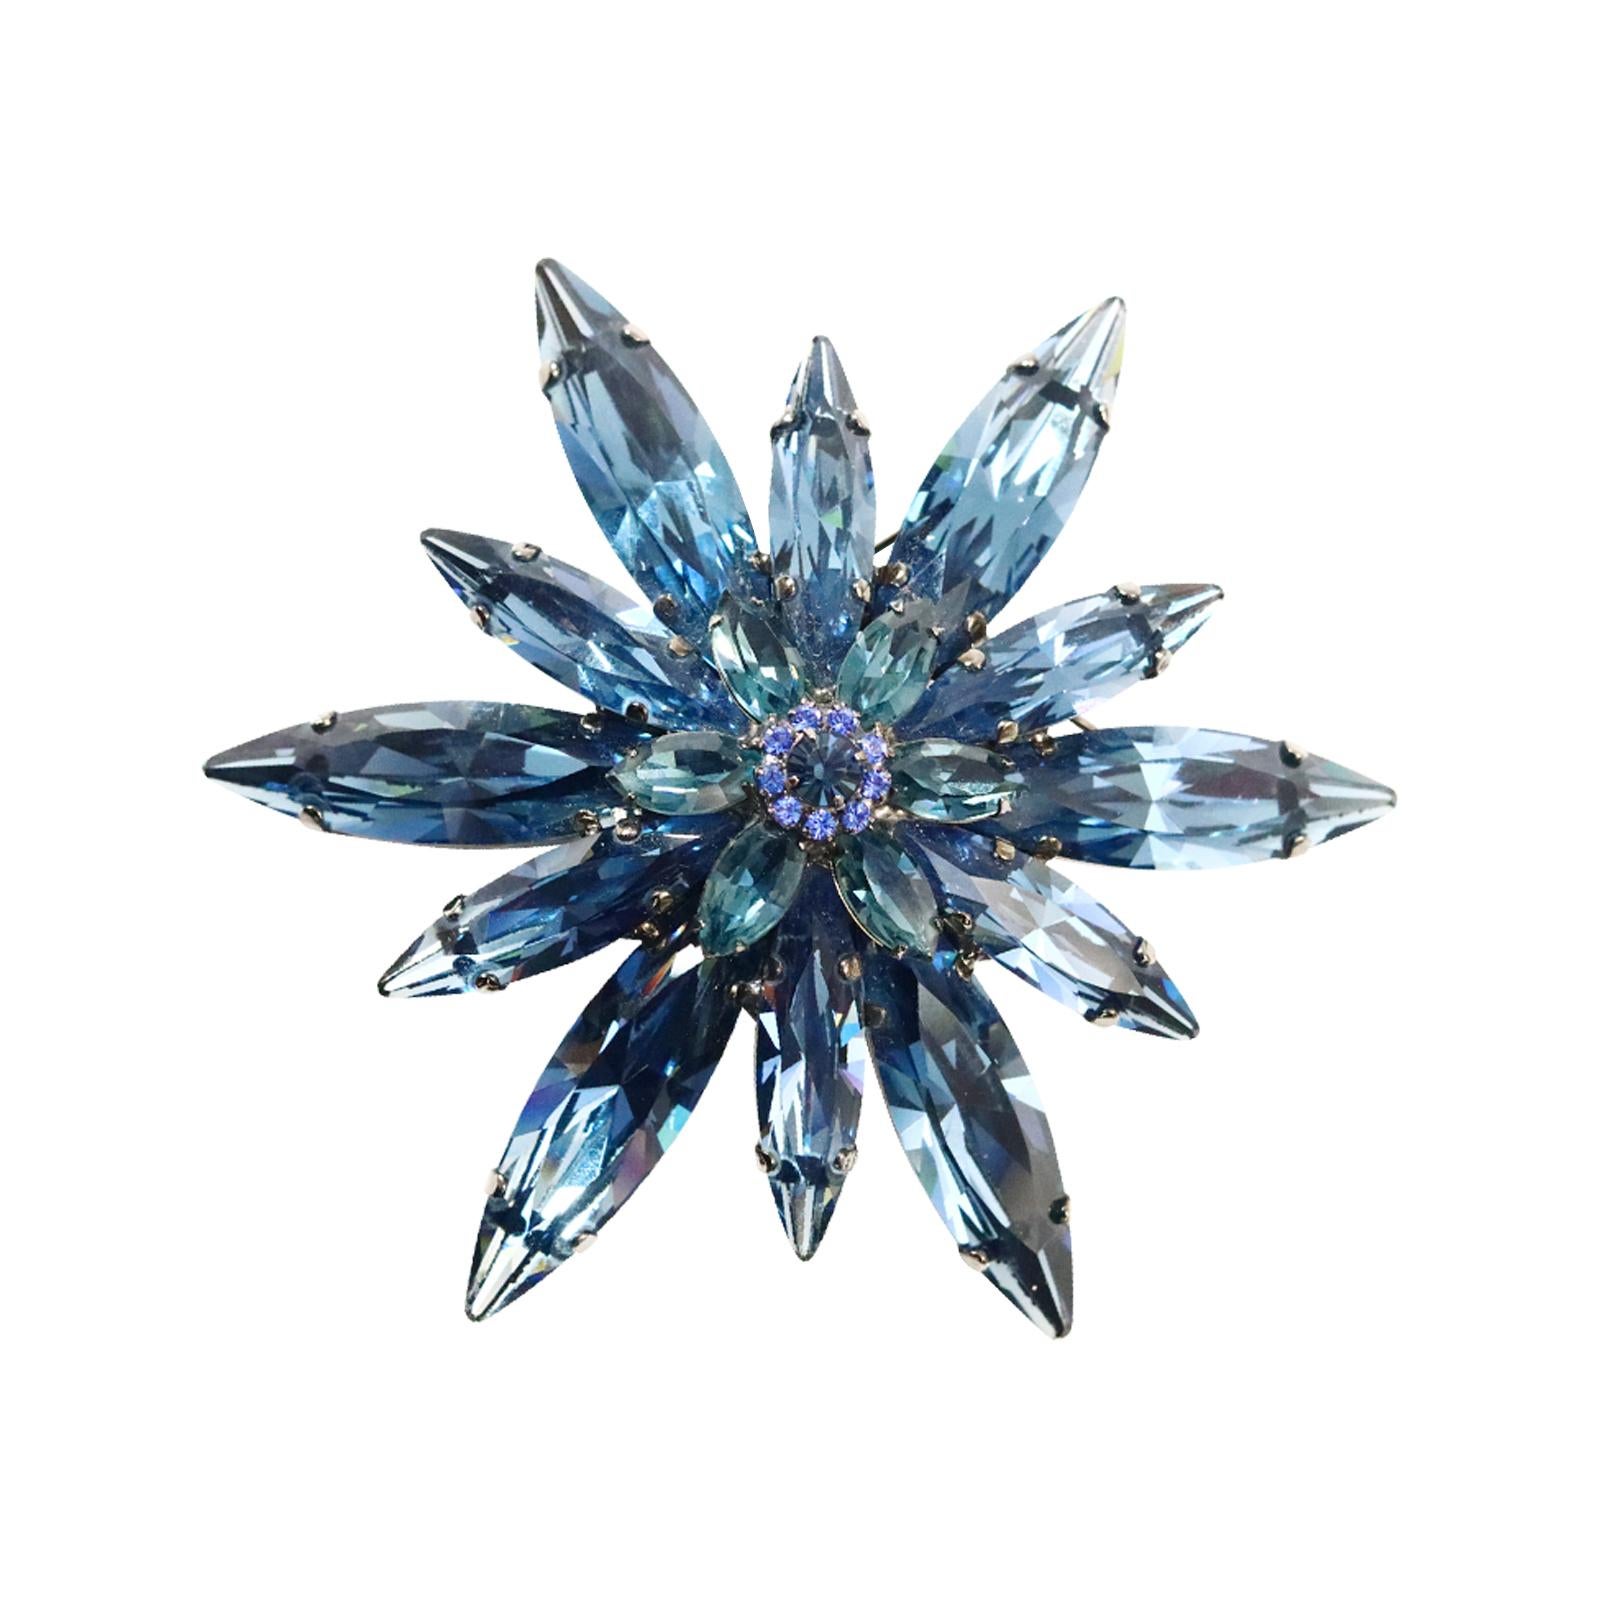 Collectible Tim Szlyk Montana Blue Crystal Brooch Circa 2000s In Good Condition For Sale In New York, NY